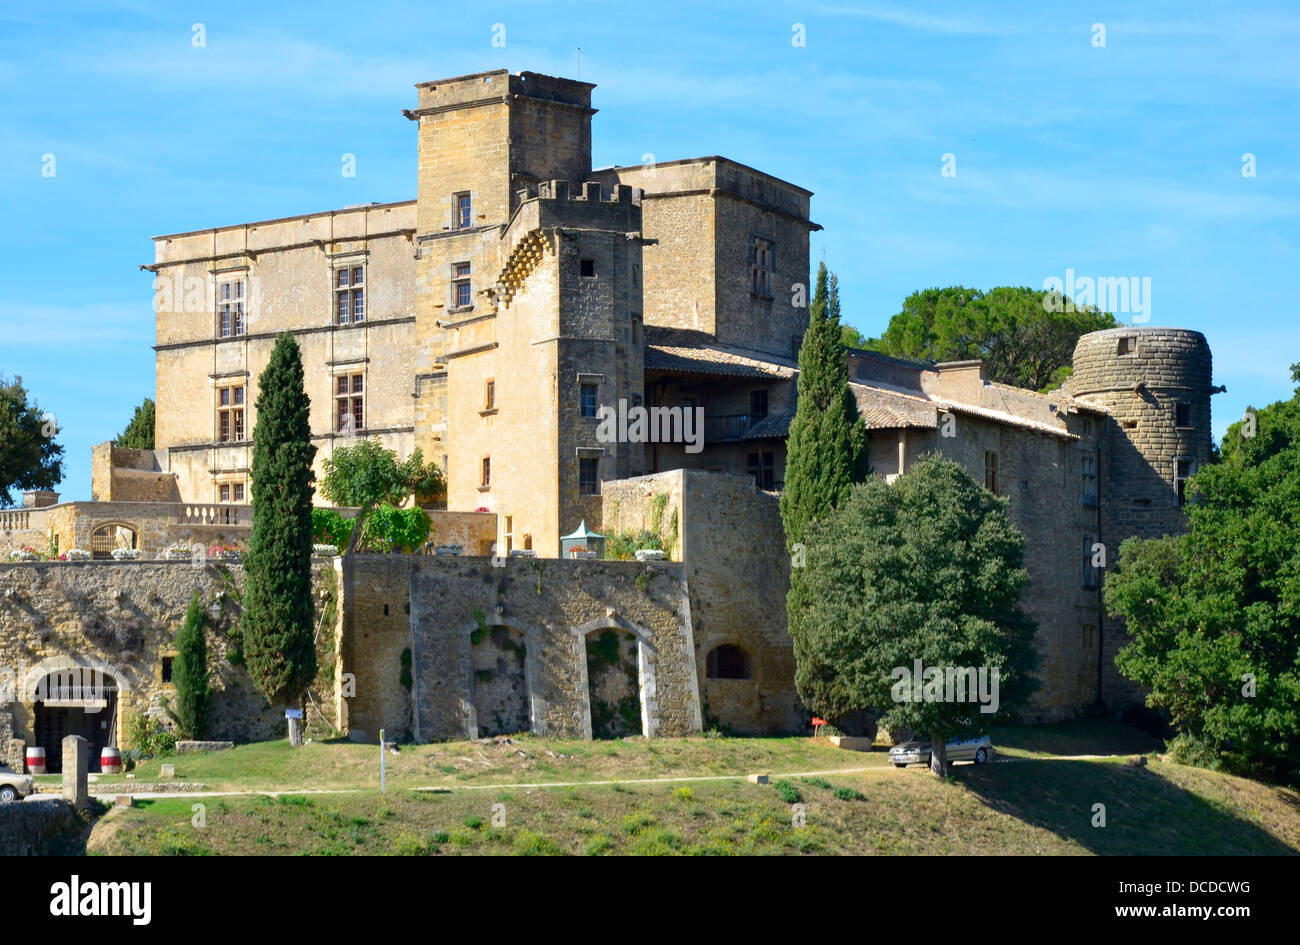 Château de Lourmarin, Lourmarin castle located in the town of Lourmarin, situated in the Vaucluse département, France Stock Photo